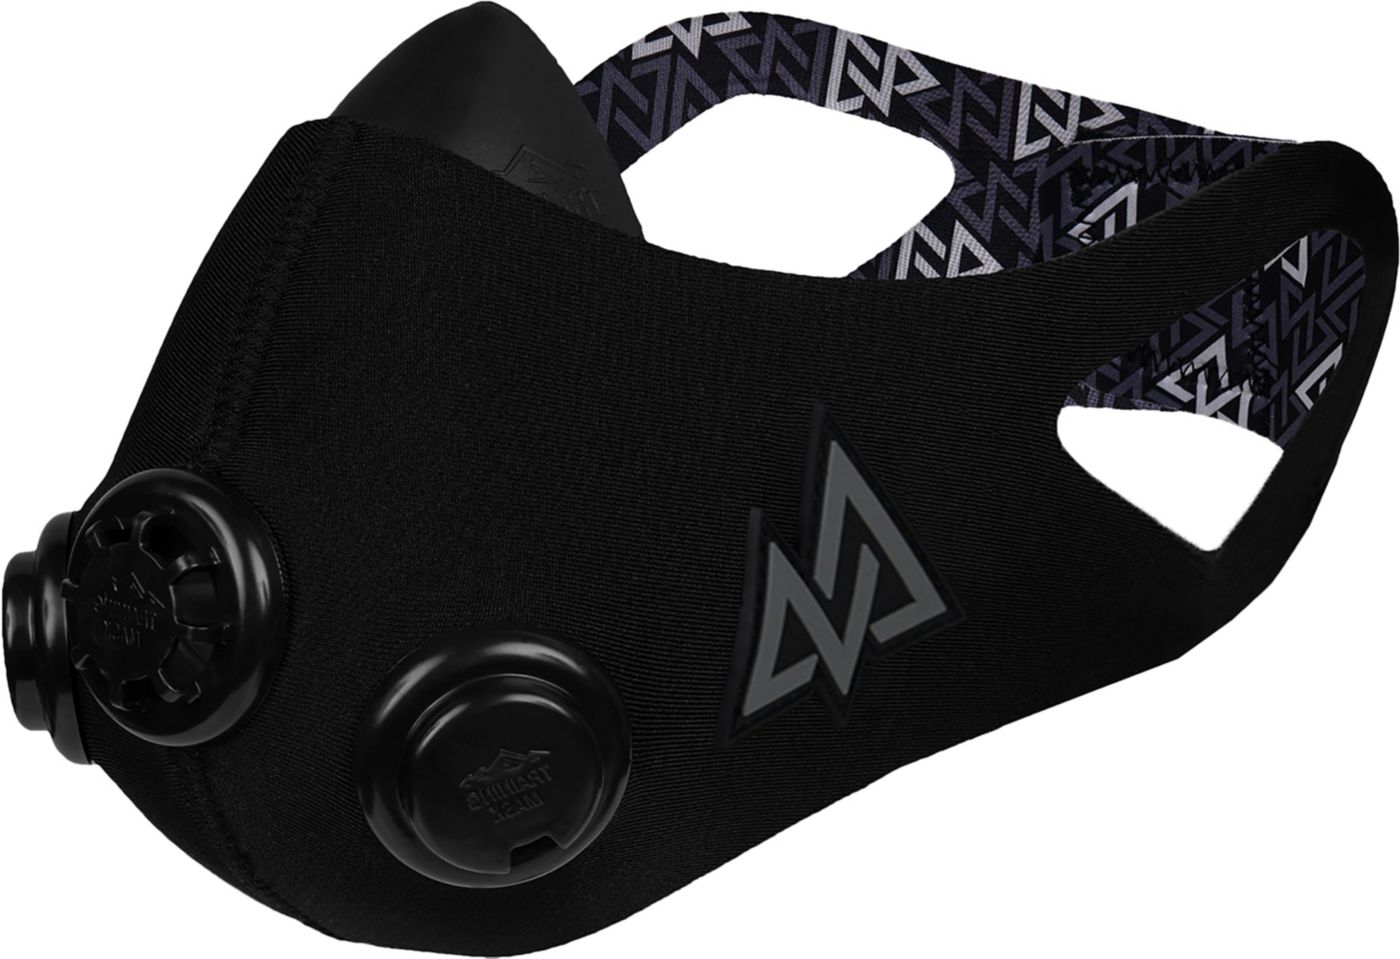 Elevation Training Mask 2.0 | DICK'S Sporting Goods